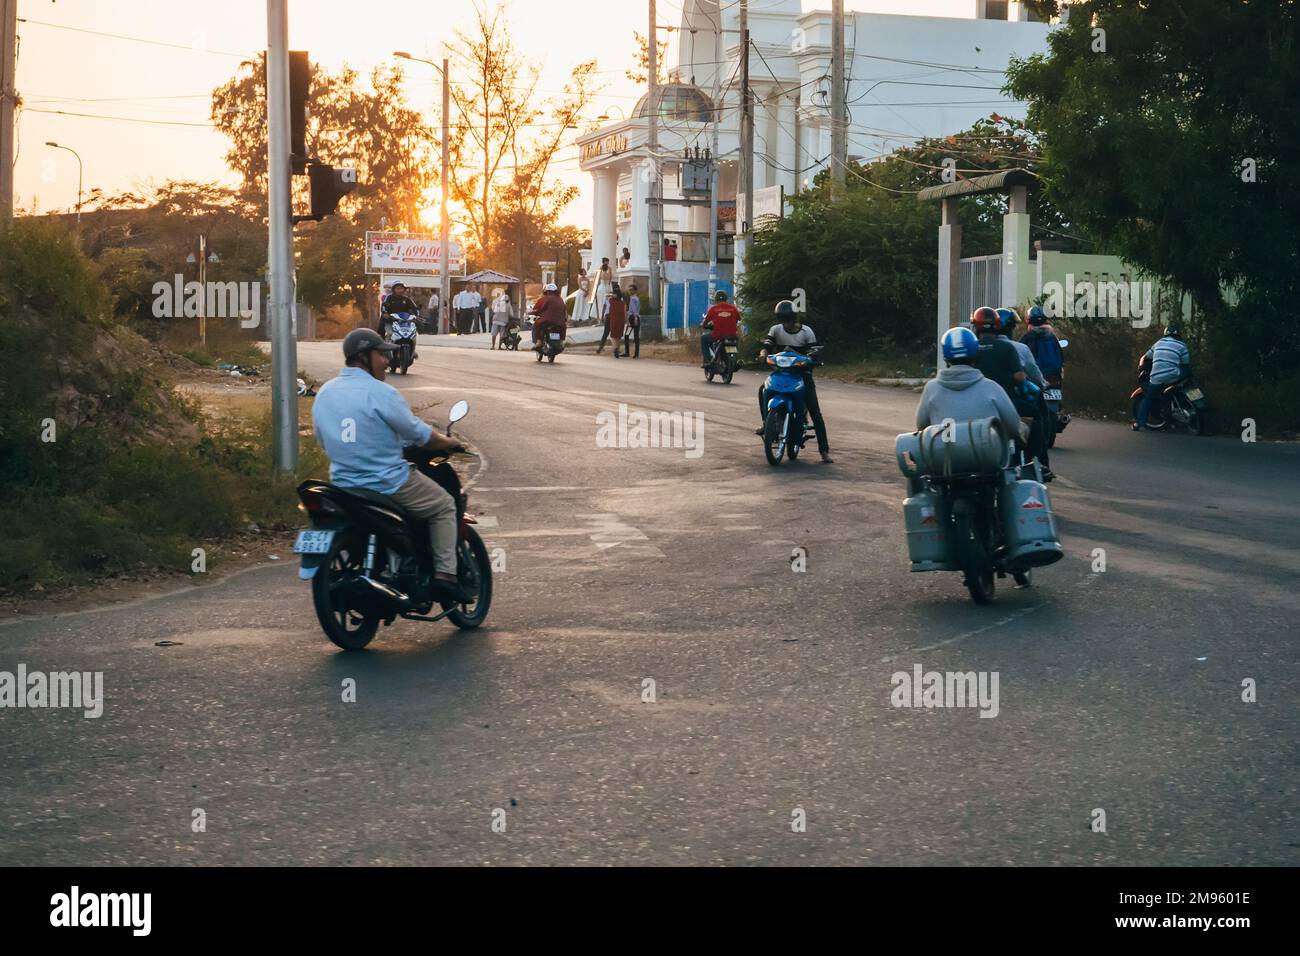 MUI NE, VIETNAM - CIRCA MARCH 2017: A lot of people riding motorbikes on the road Stock Photo